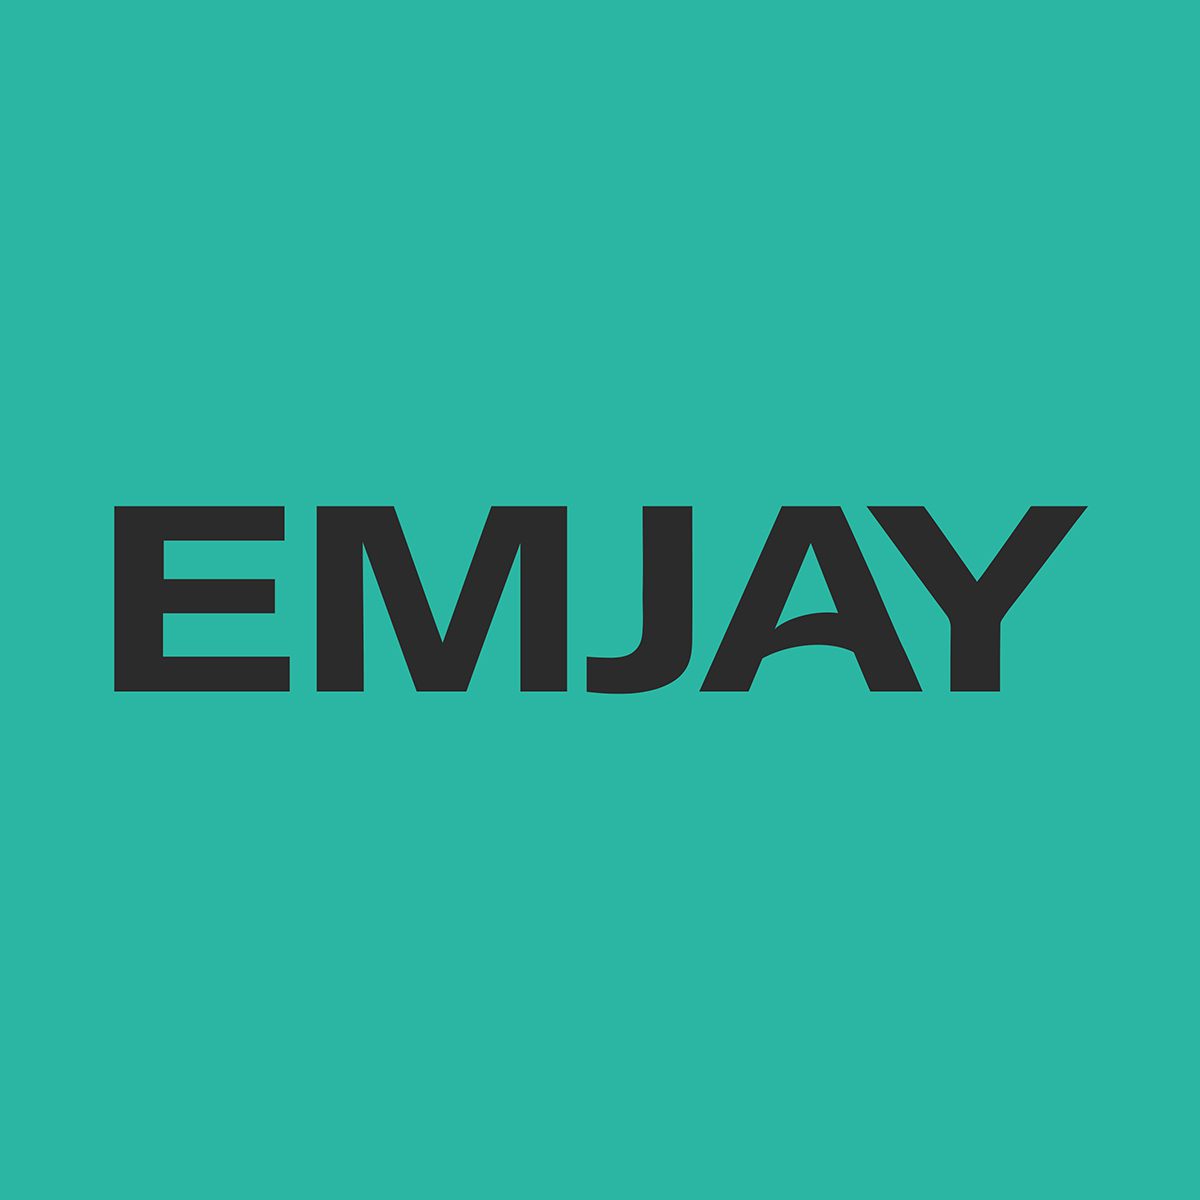 Welcome to Emjay